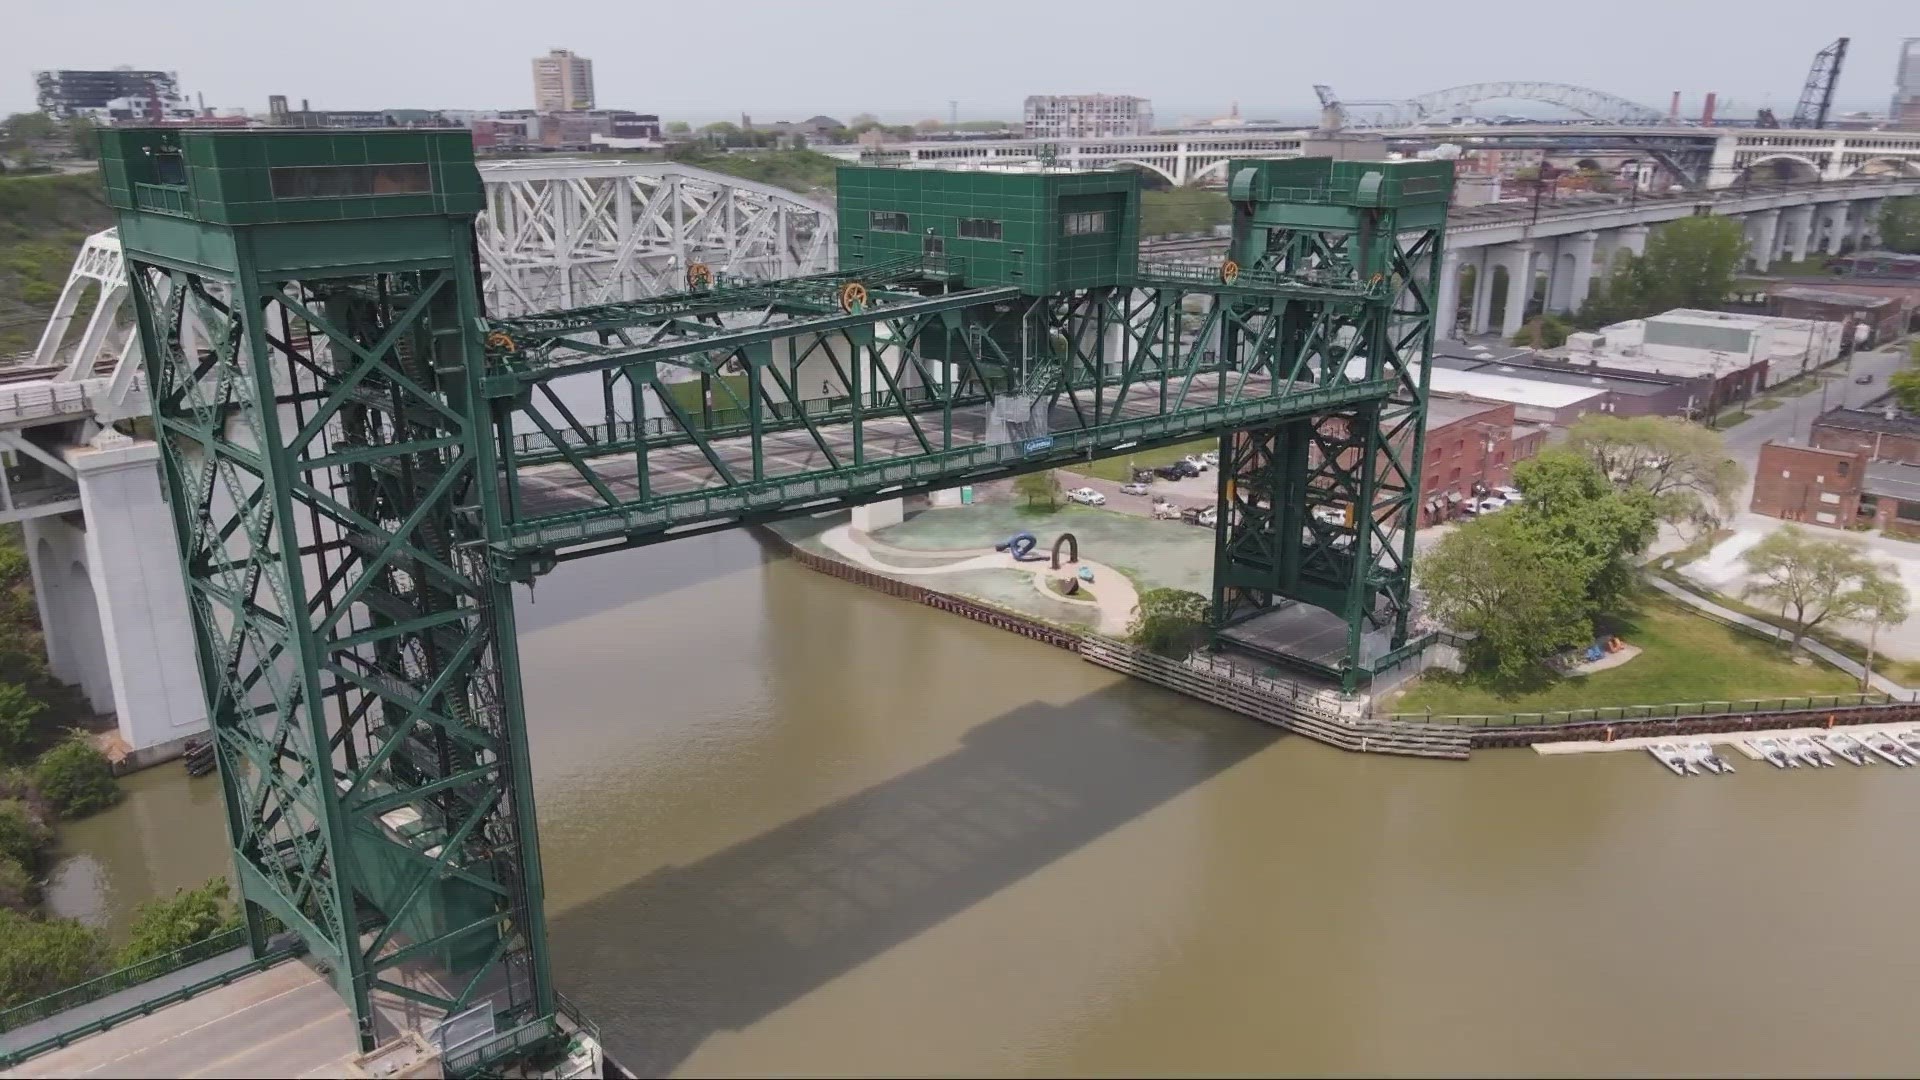 The Columbus Road Bridge and the Center Street Swing Bridge are both under construction, causing frustration for business owners and community members.